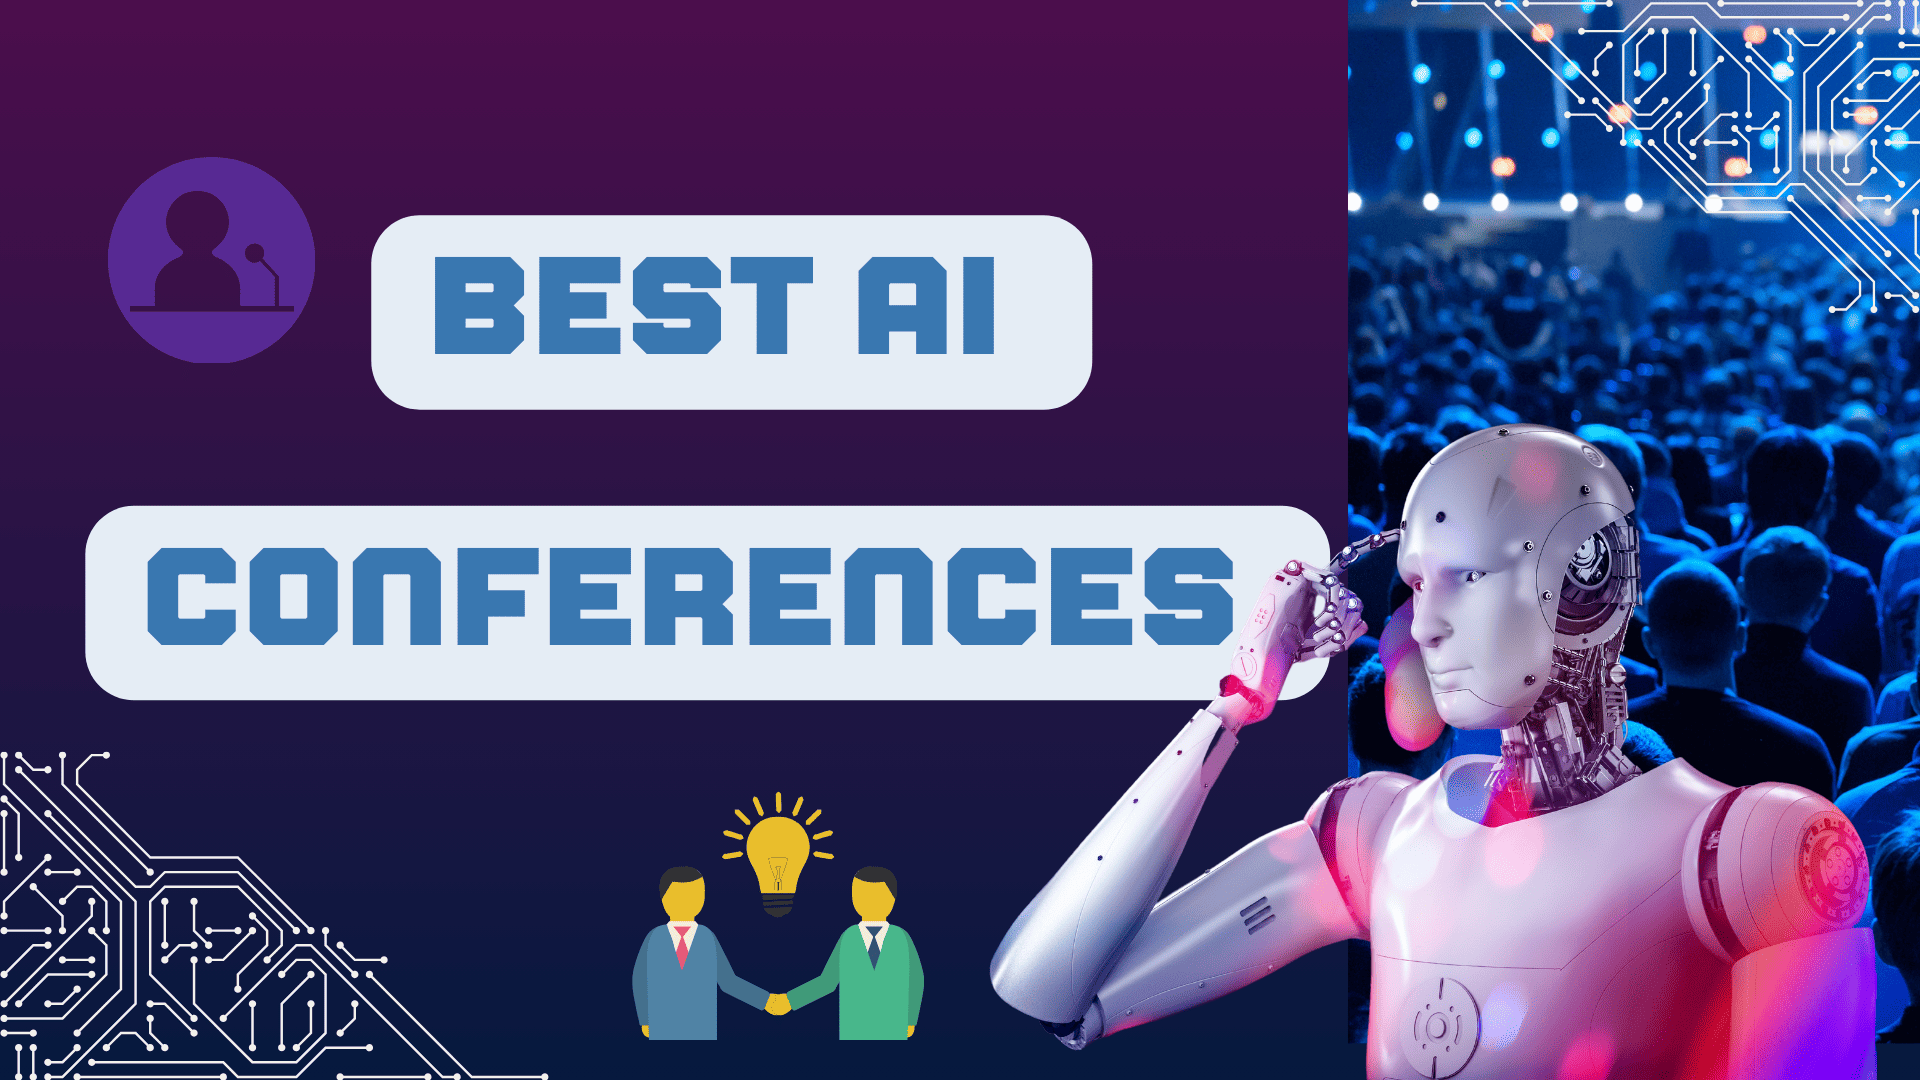 10 Best AI Conferences To Attend (2023)